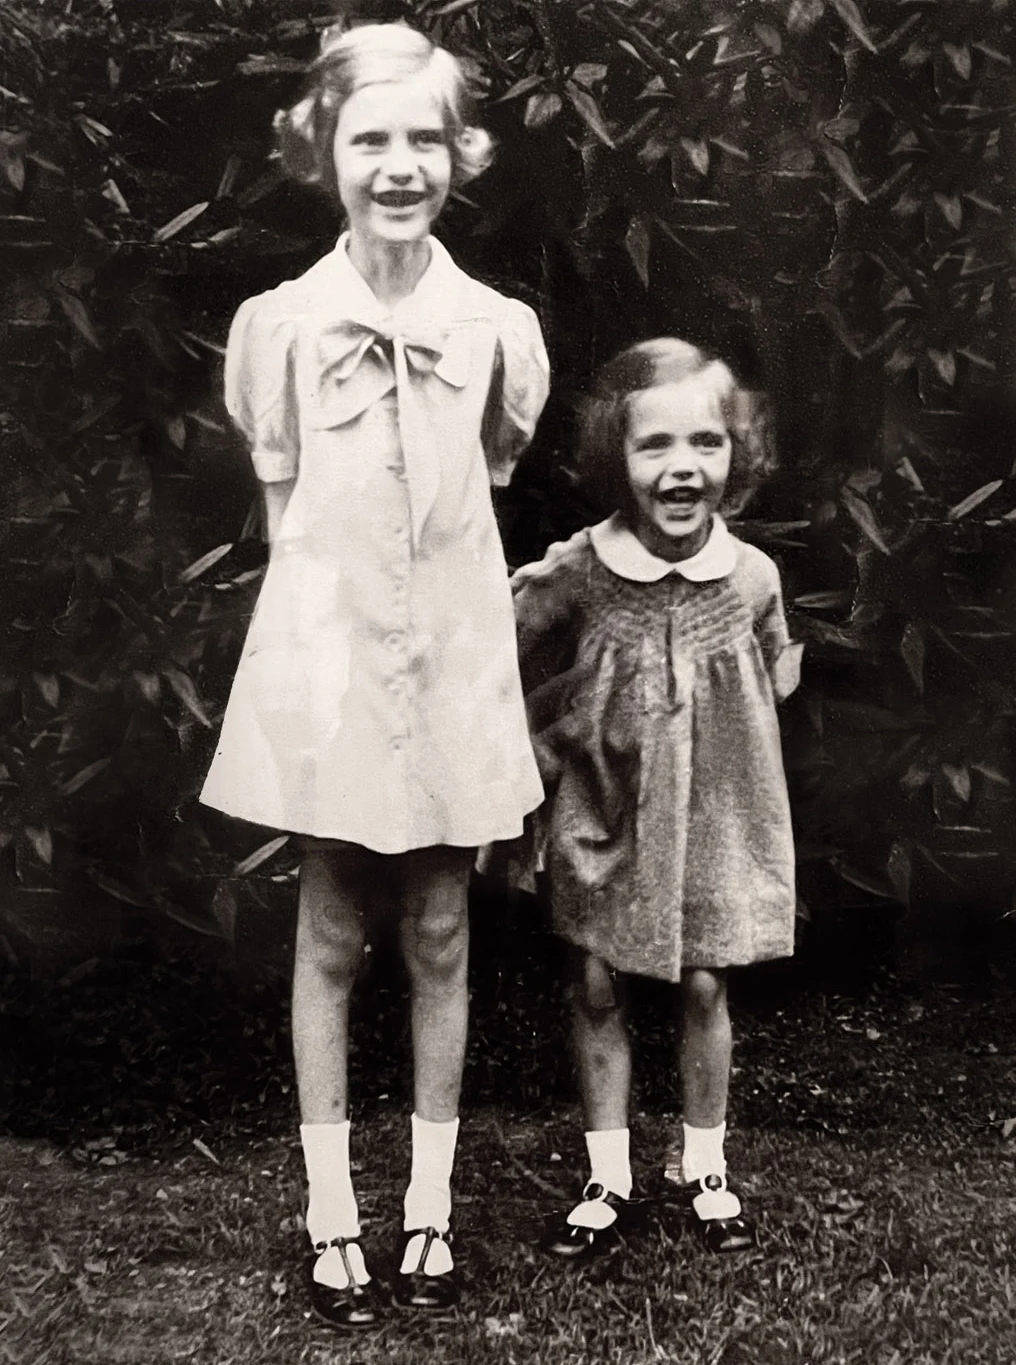 At five years old with big sister, Patti. Though I hated that dress, I’m giddy with excitement to have my picture taken.